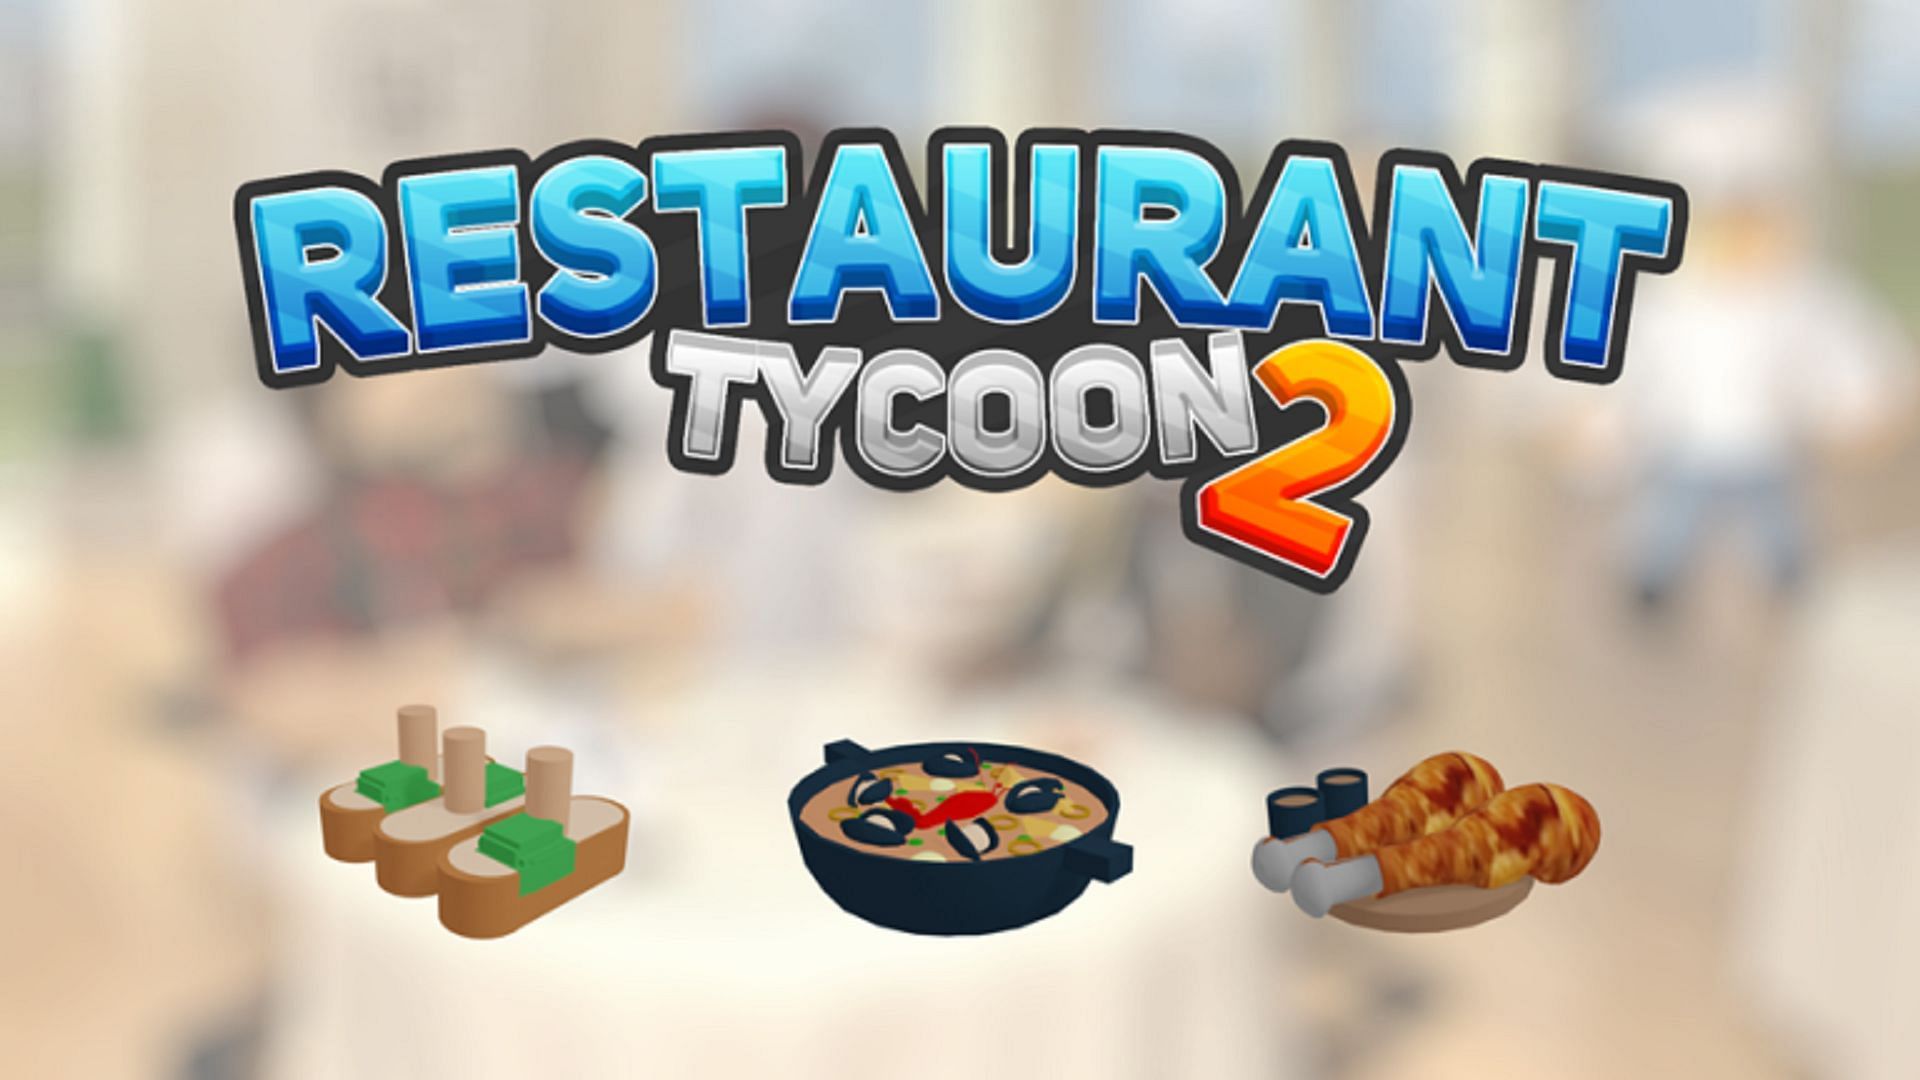 All working codes in Restaurant Tycoon 2 (Image via Roblox)